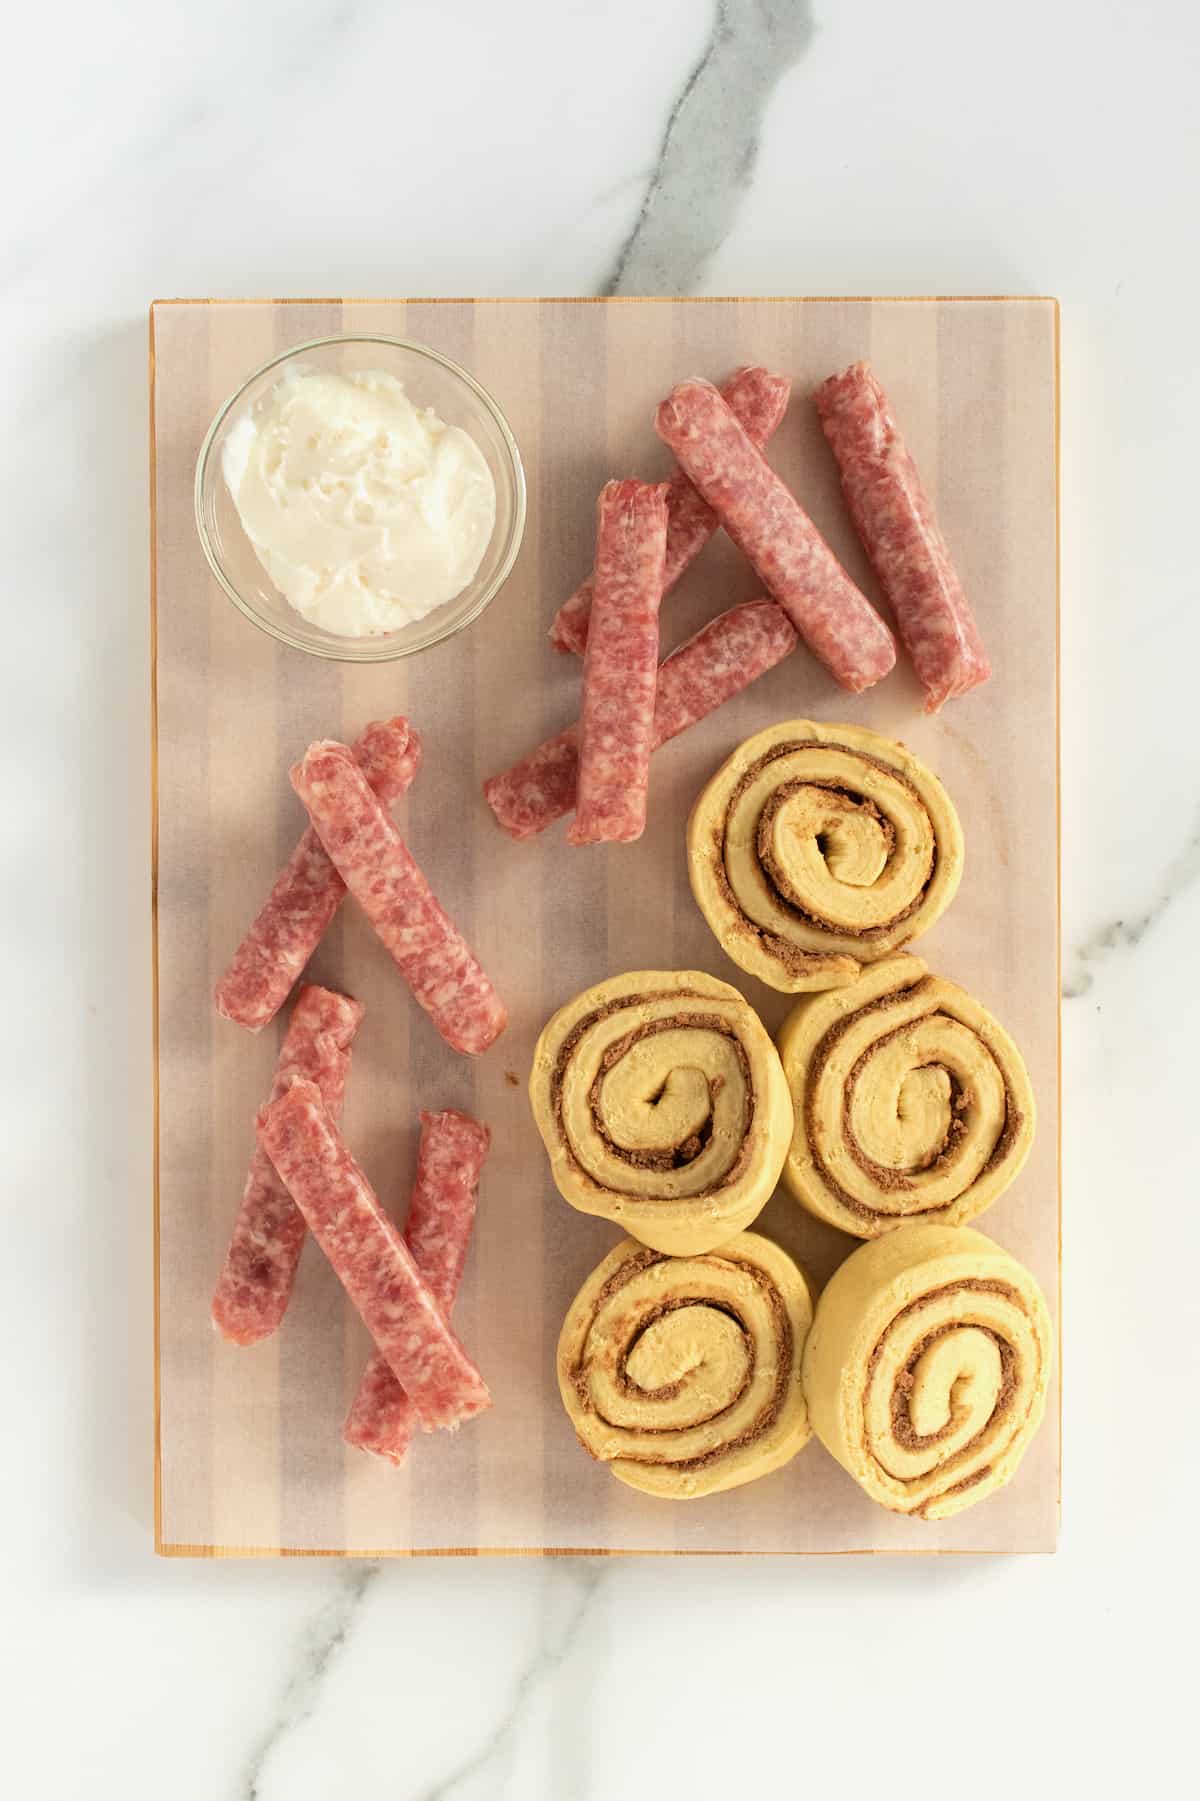 Cinnamon Roll Pigs in a Blanket by The BakerMama